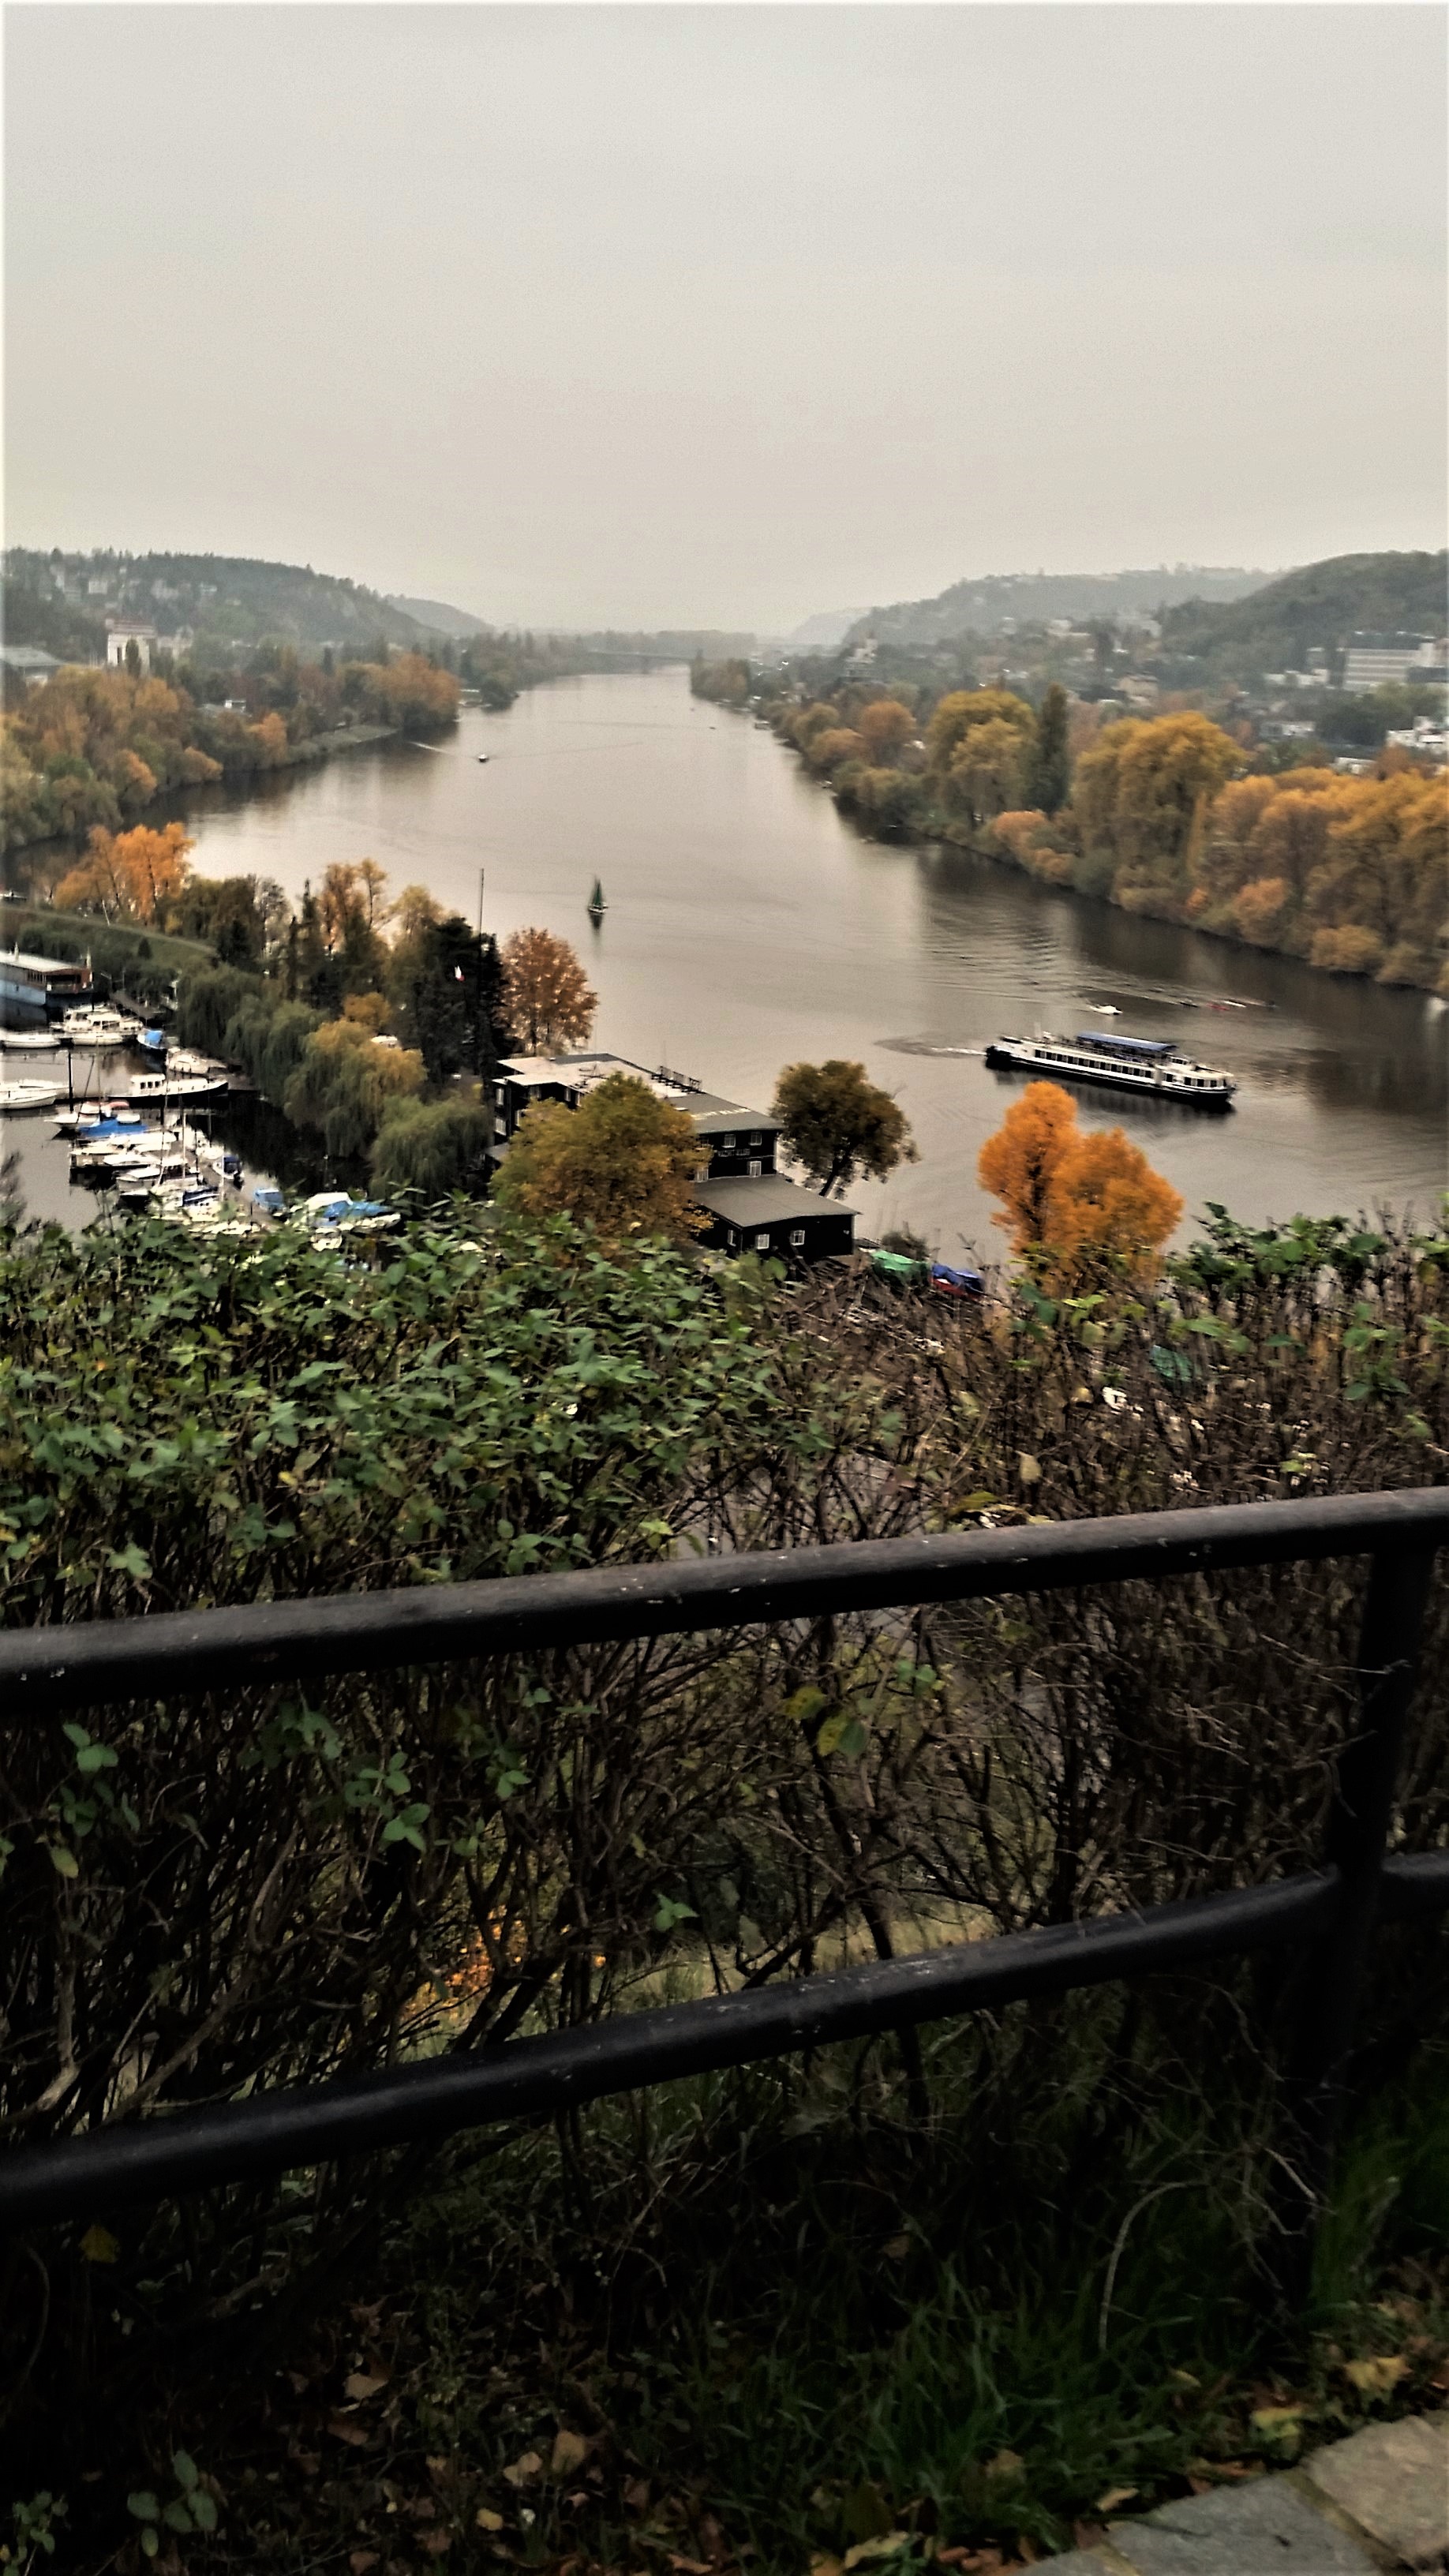 View of the Vltava River in Vysehrad